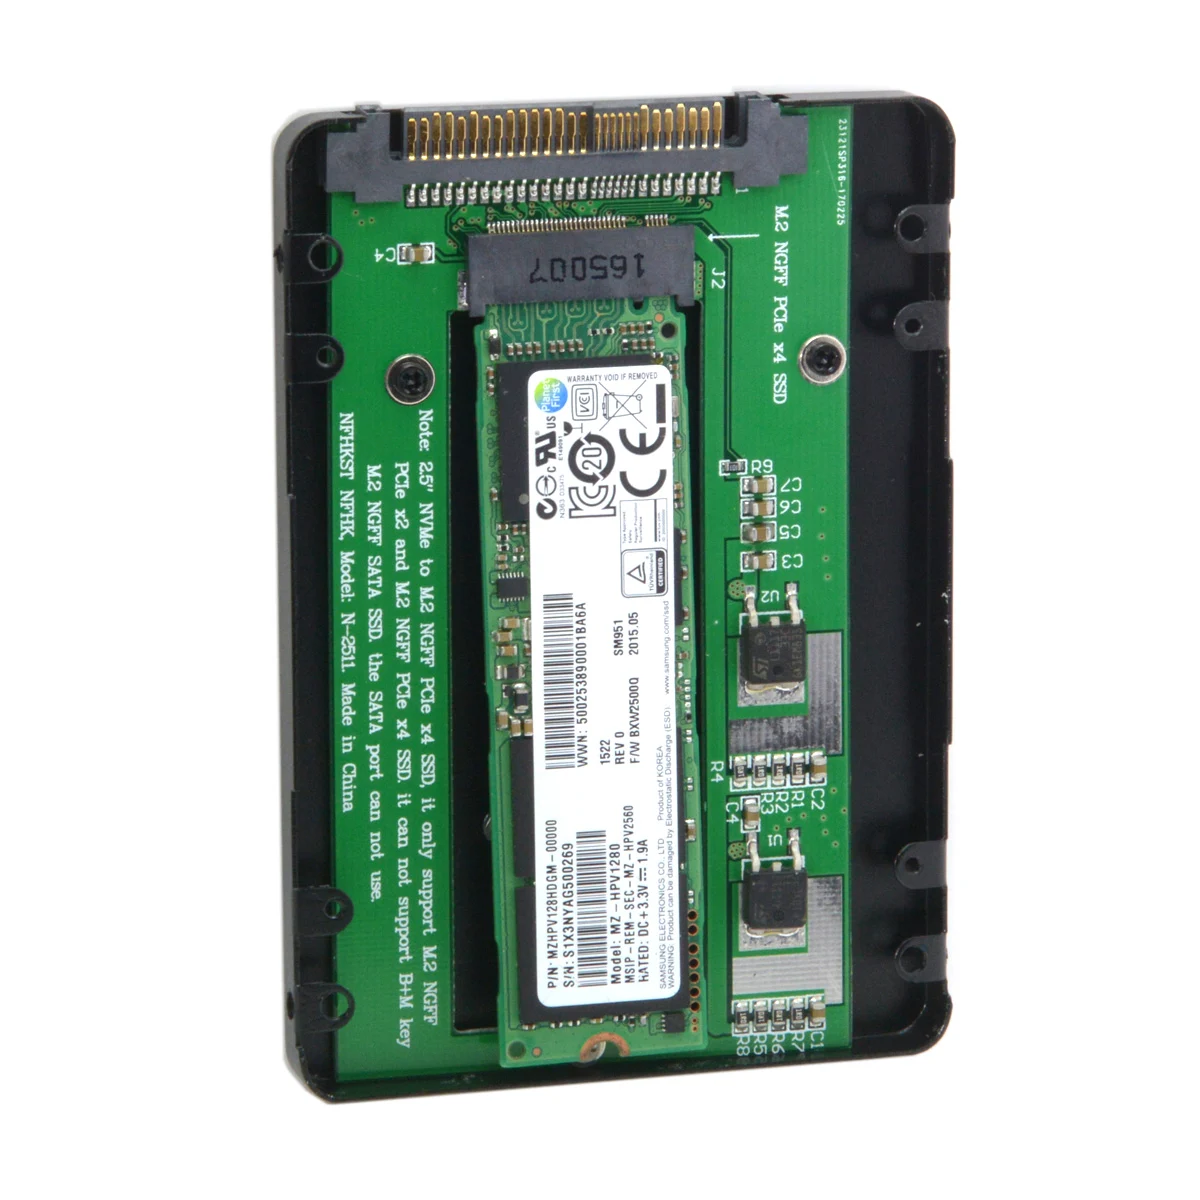 

Xiwai SFF-8639 NVME U.2 to NGFF M.2 M-key PCIe SSD Case Enclosure Converter for Mainboard Replace Intel SSD 750 p3600 p3700